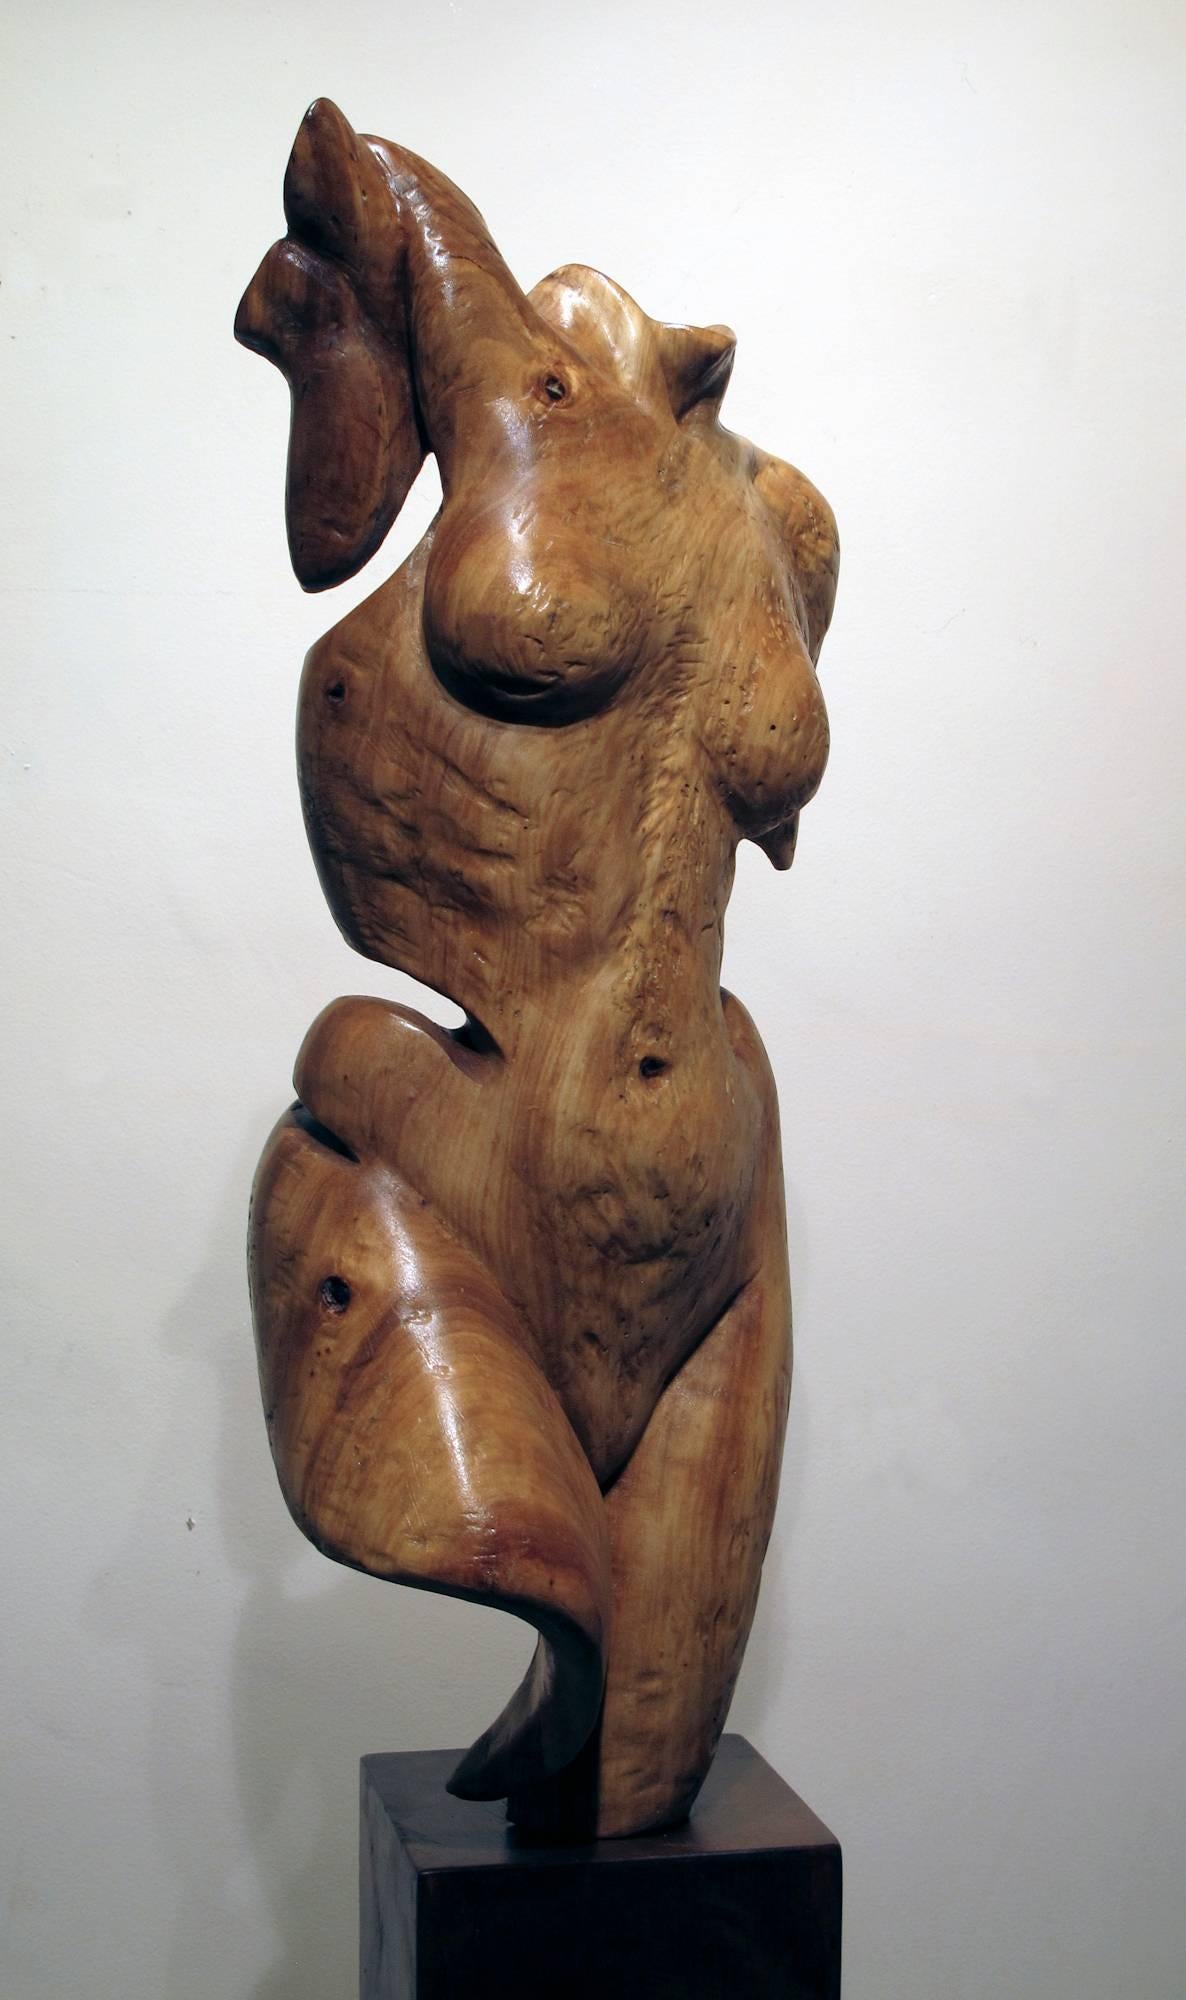 Torso, female nude wood sculpture - Sculpture by Troy Williams